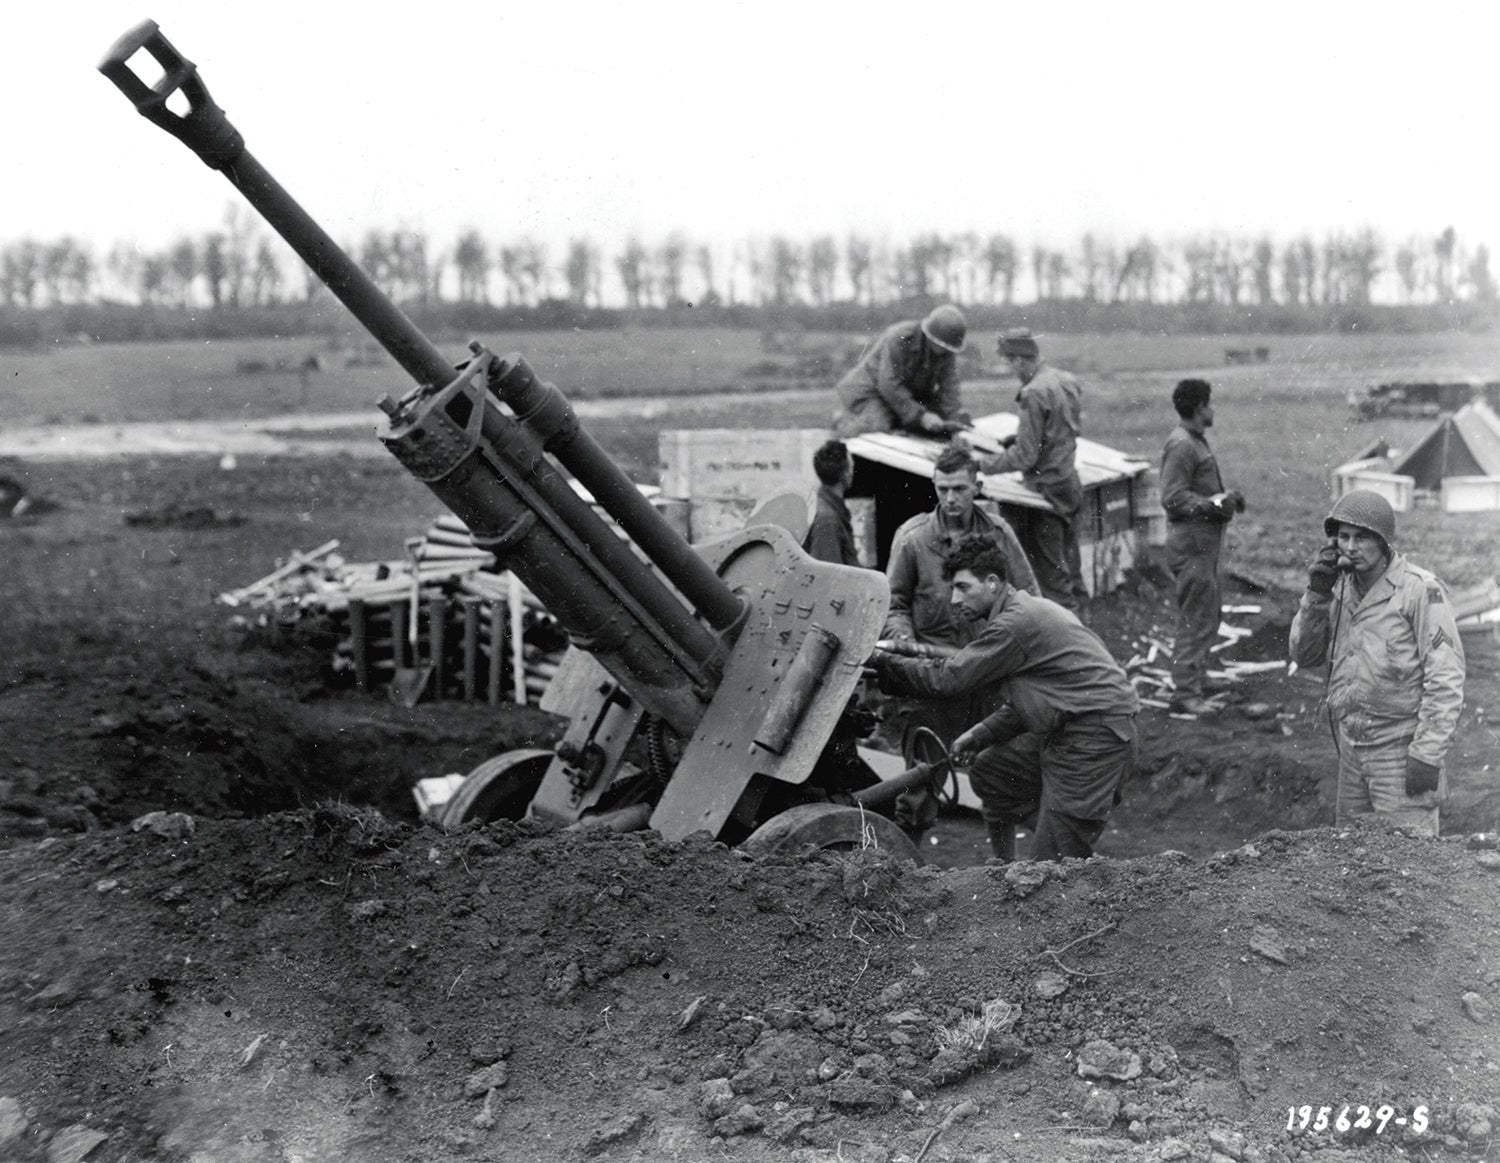 A gun crew with the 90th Infantry Division works with a Russian weapon in France in October 1944. (Credit: U.S. Army)